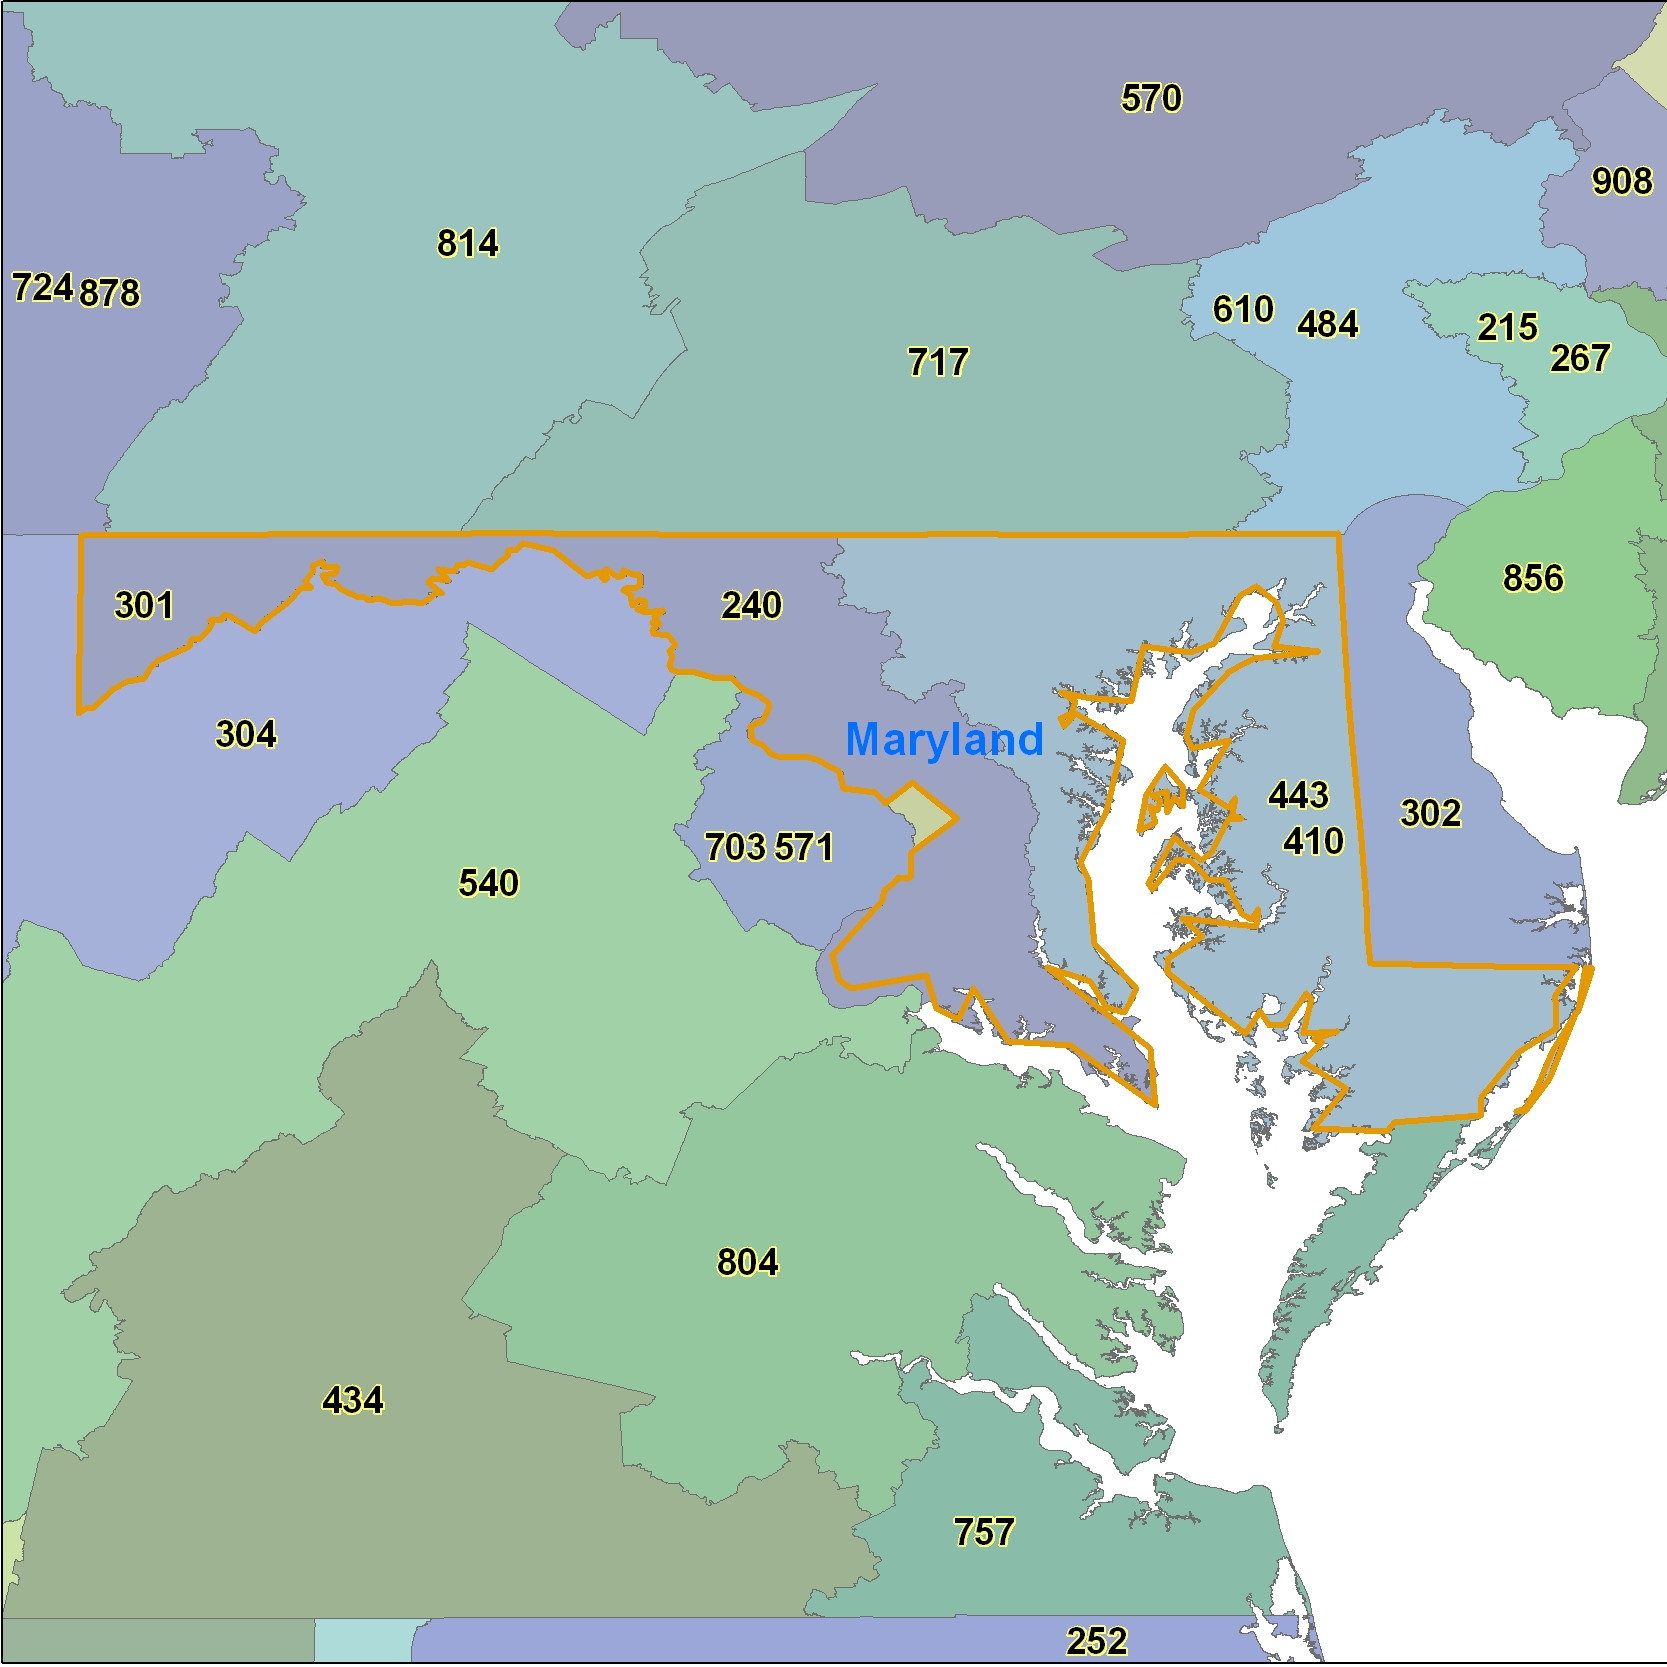 Maryland (MD) Area Code Map